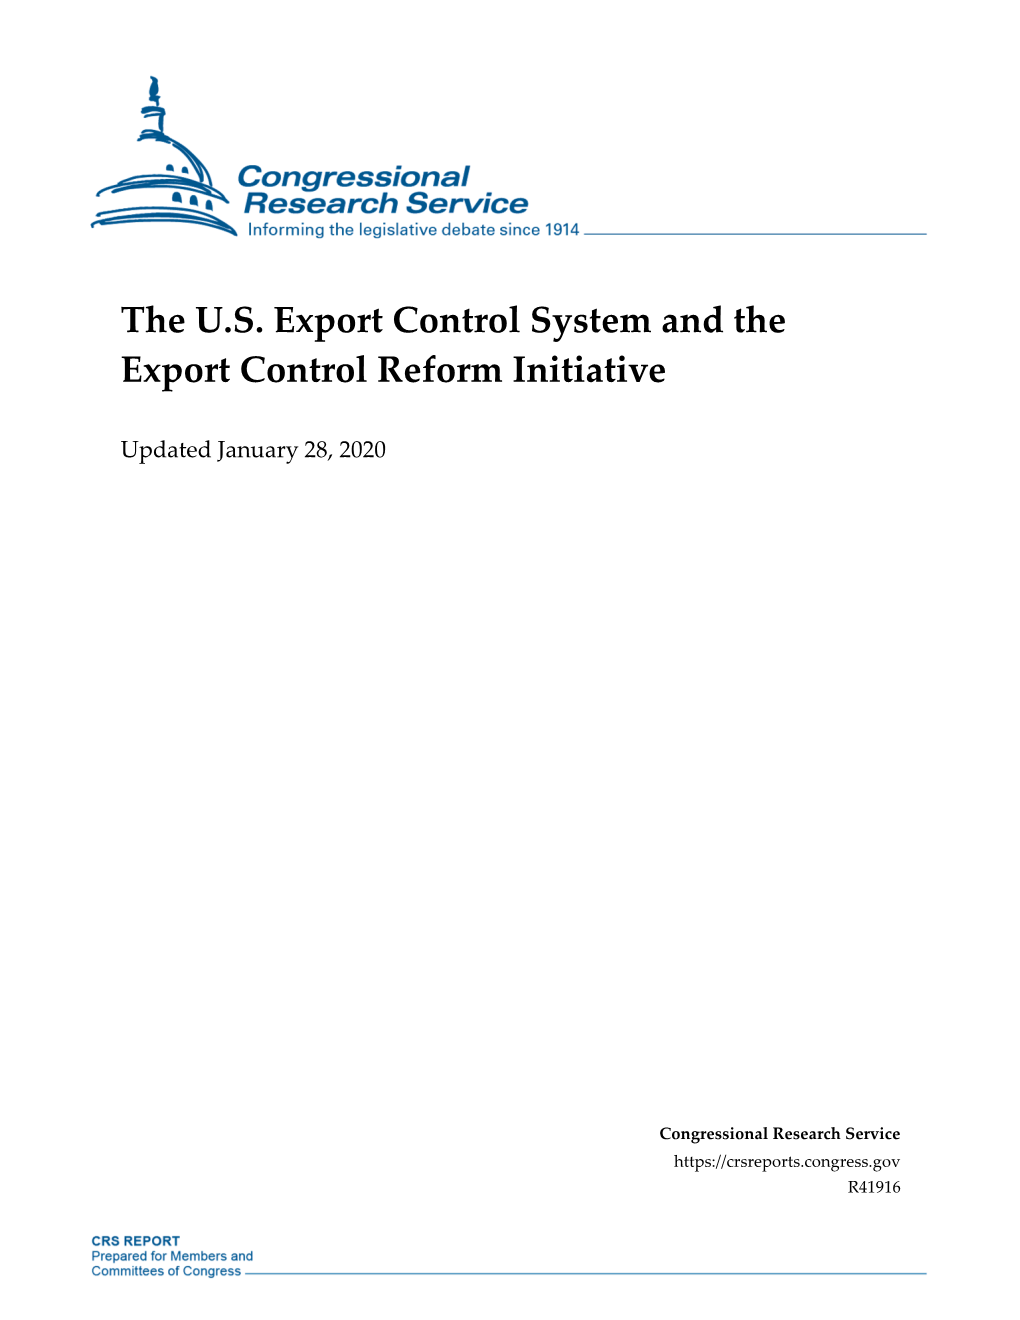 The U.S. Export Control System and the Export Control Reform Initiative